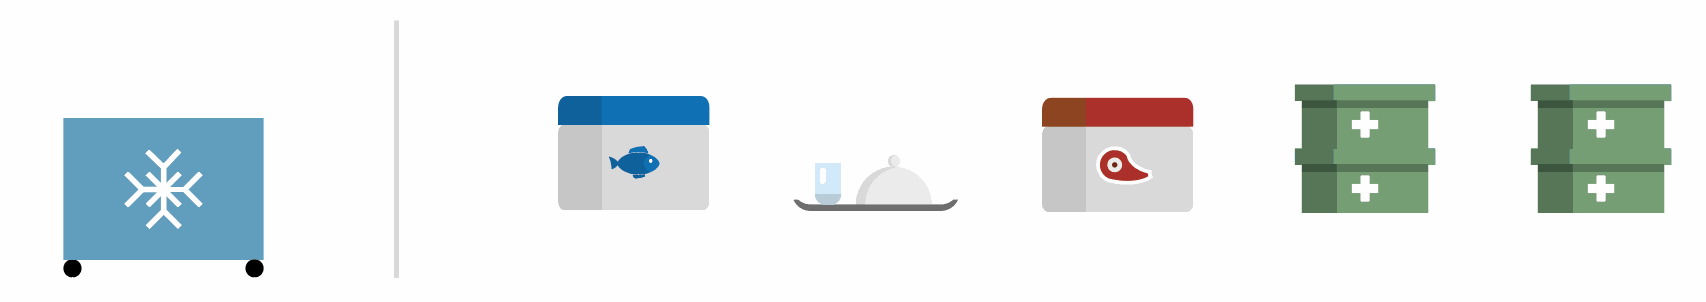 Pictogram of a wheeled, blue container with a white snowflake on it, grey box with a blue lid and blue fish on it, tray with a glas and a metallic food cover, greu box with a red lid and a piece of meat, two stacks of two green boxes with a white cross on them